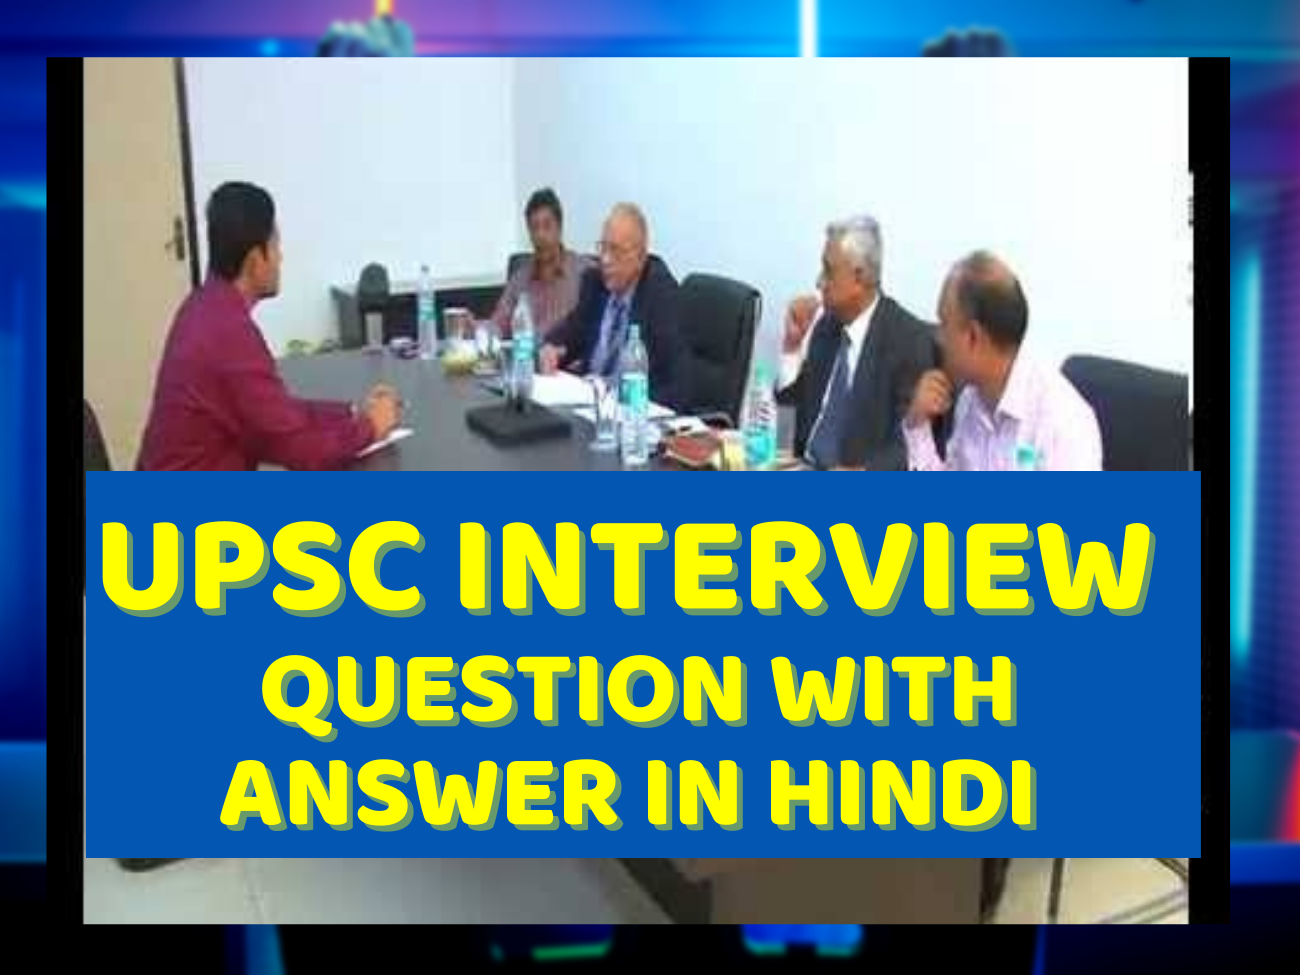 UPSC Interview Questions and Answers in Hindi